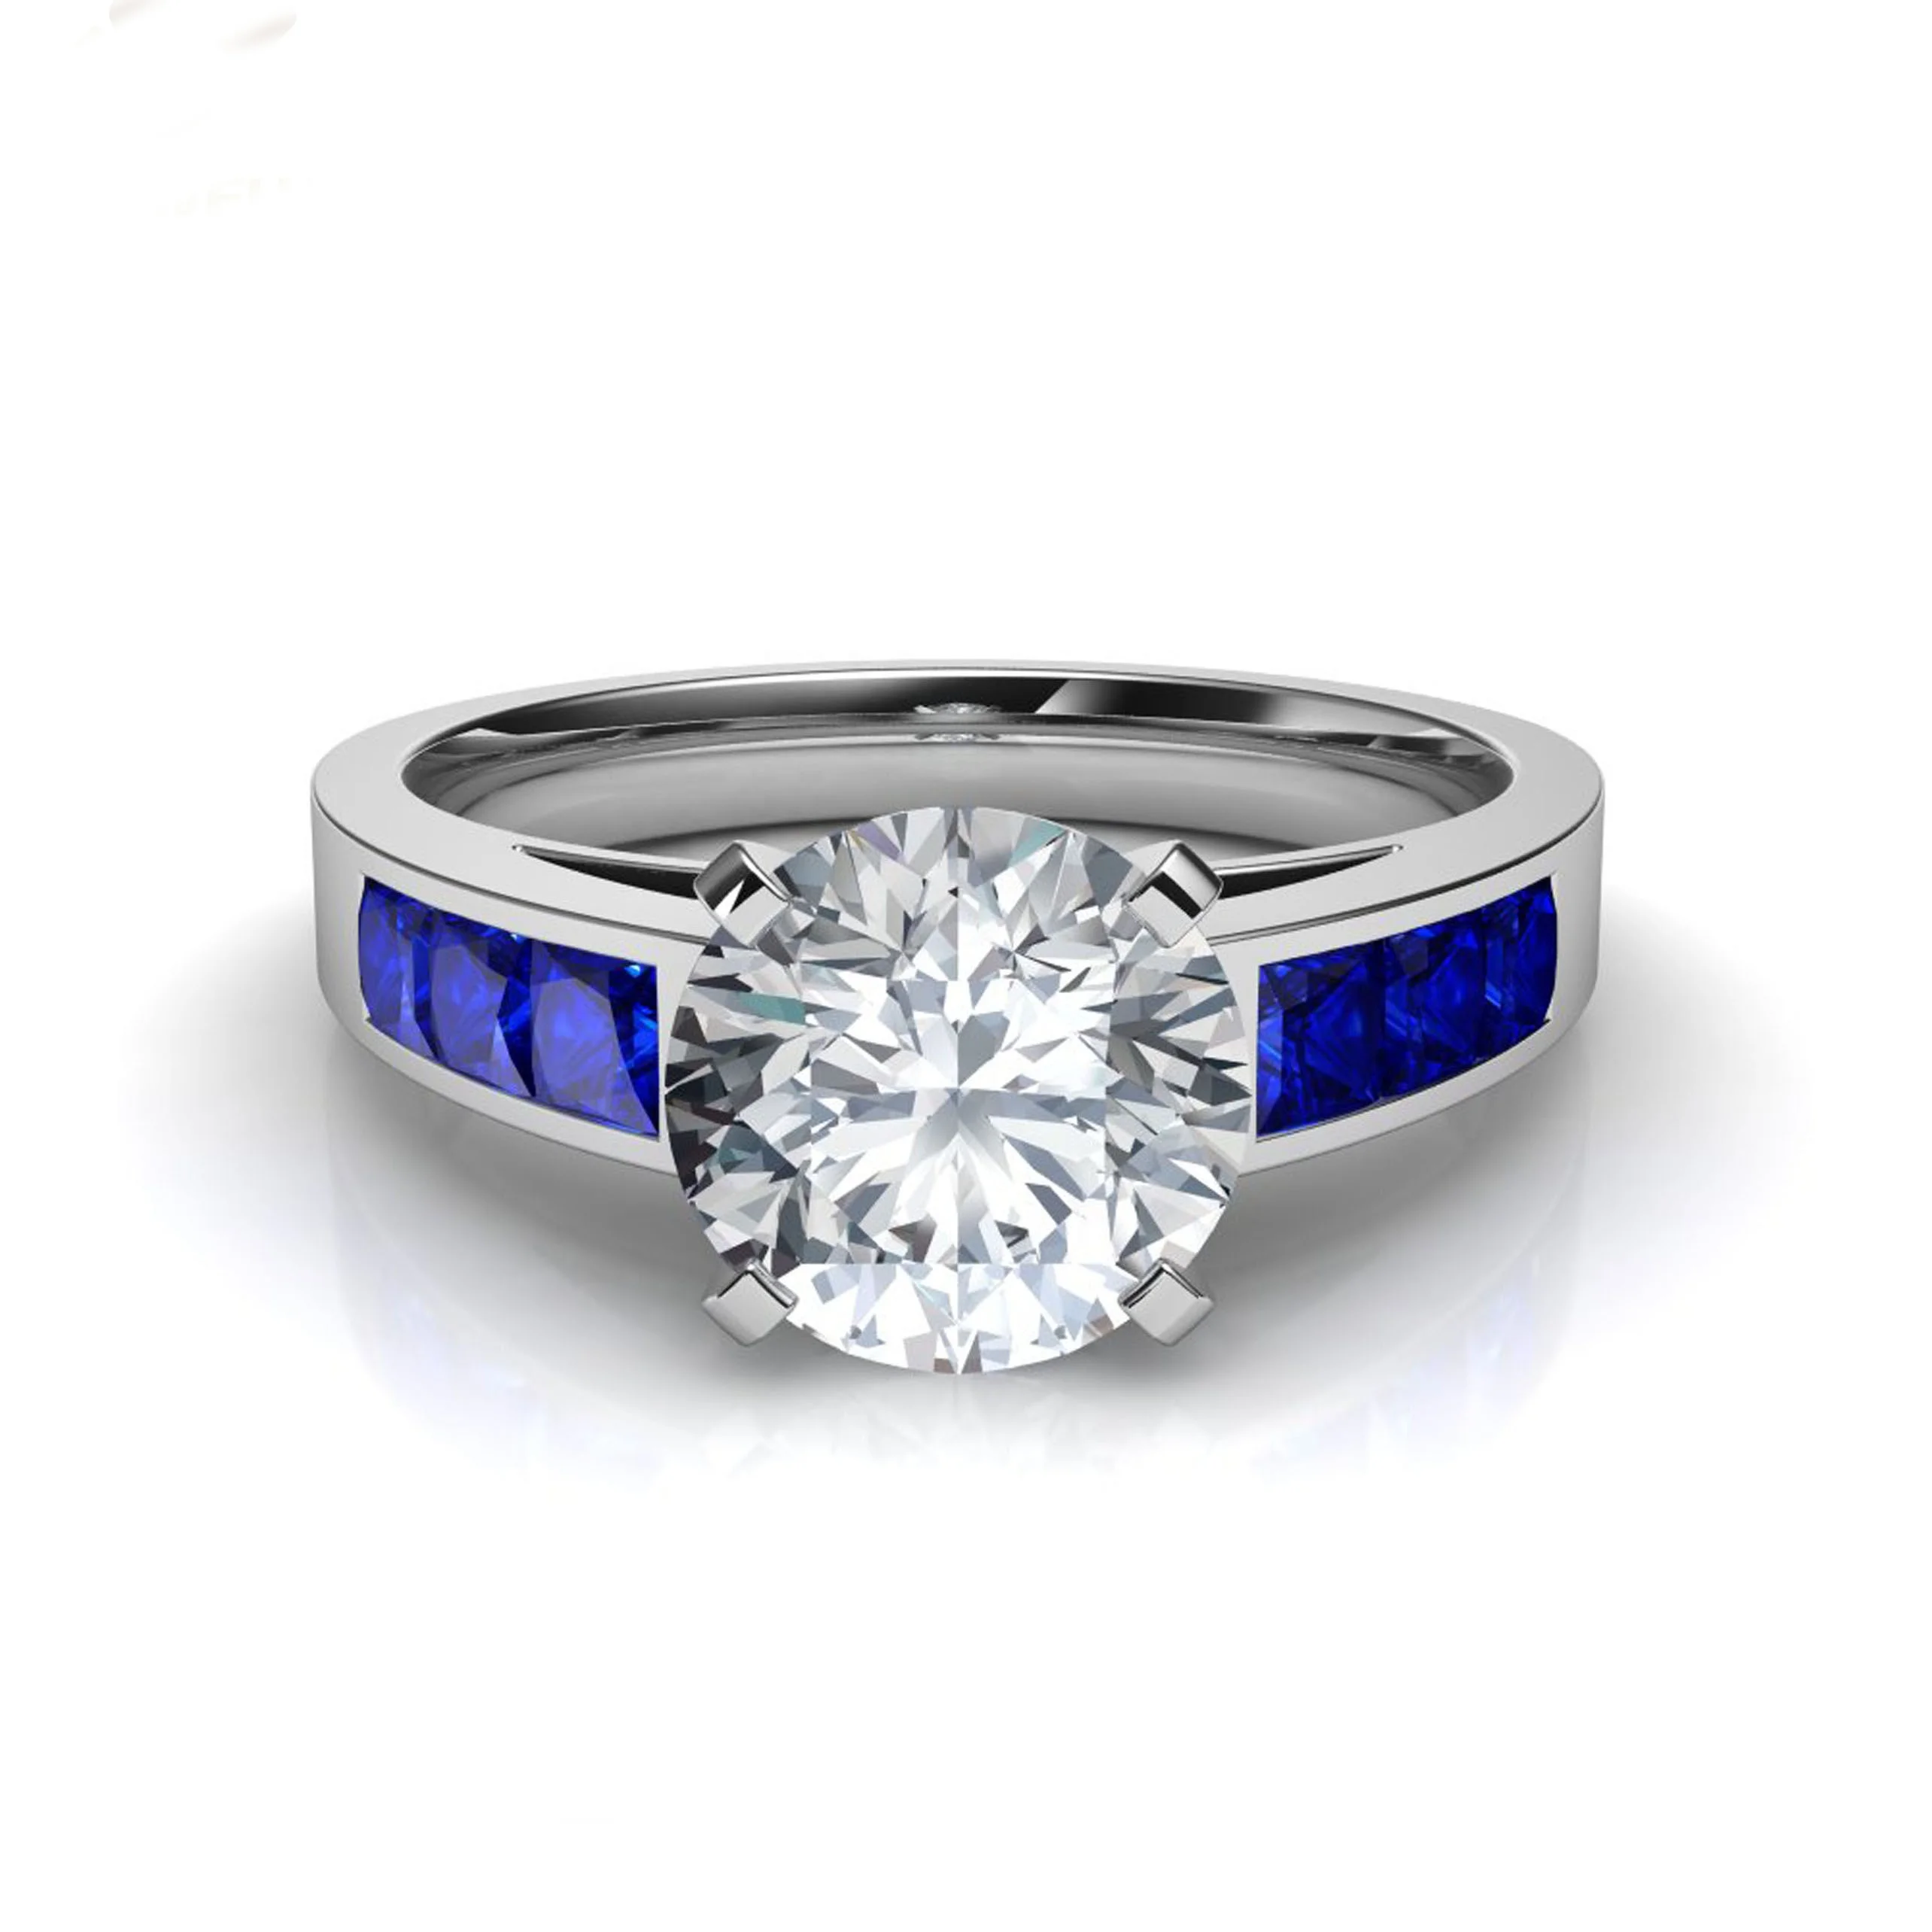 Details about   15ct Engagement Ring 925 Sterling Silver Jewelry Blue Cushion Baguette Ring Cz 